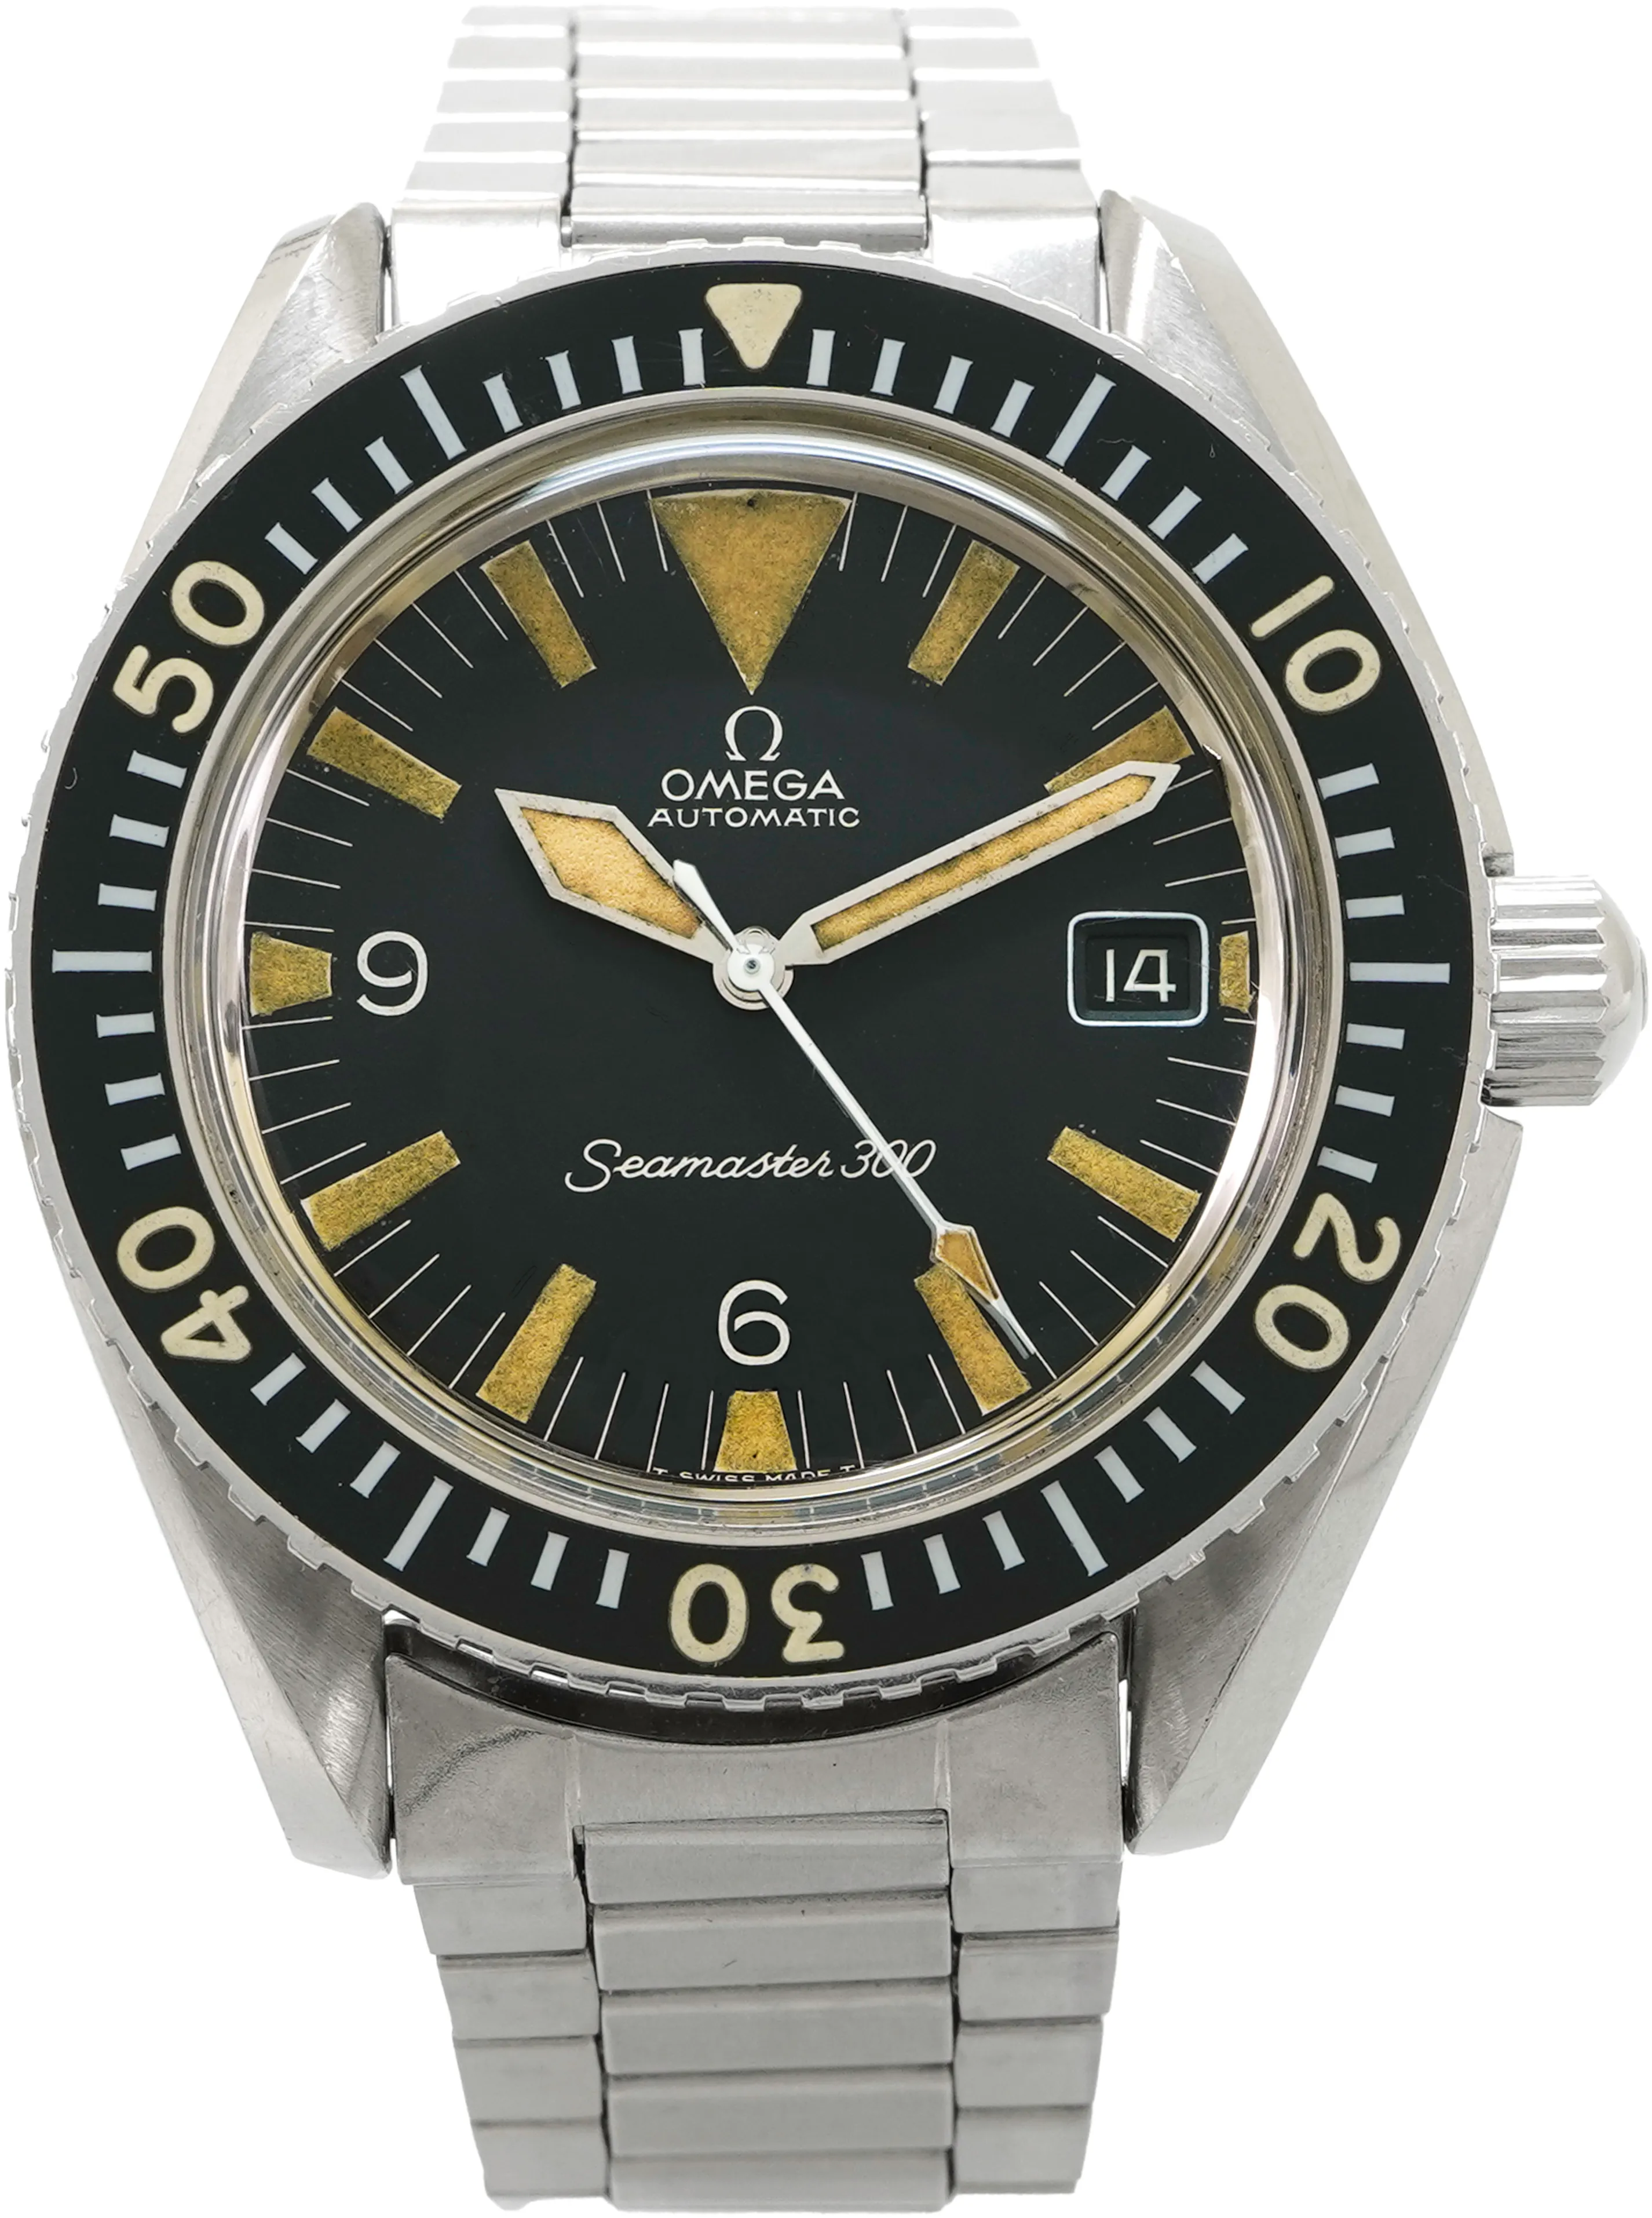 Omega Seamaster 300 166024-67 40mm Stainless steel